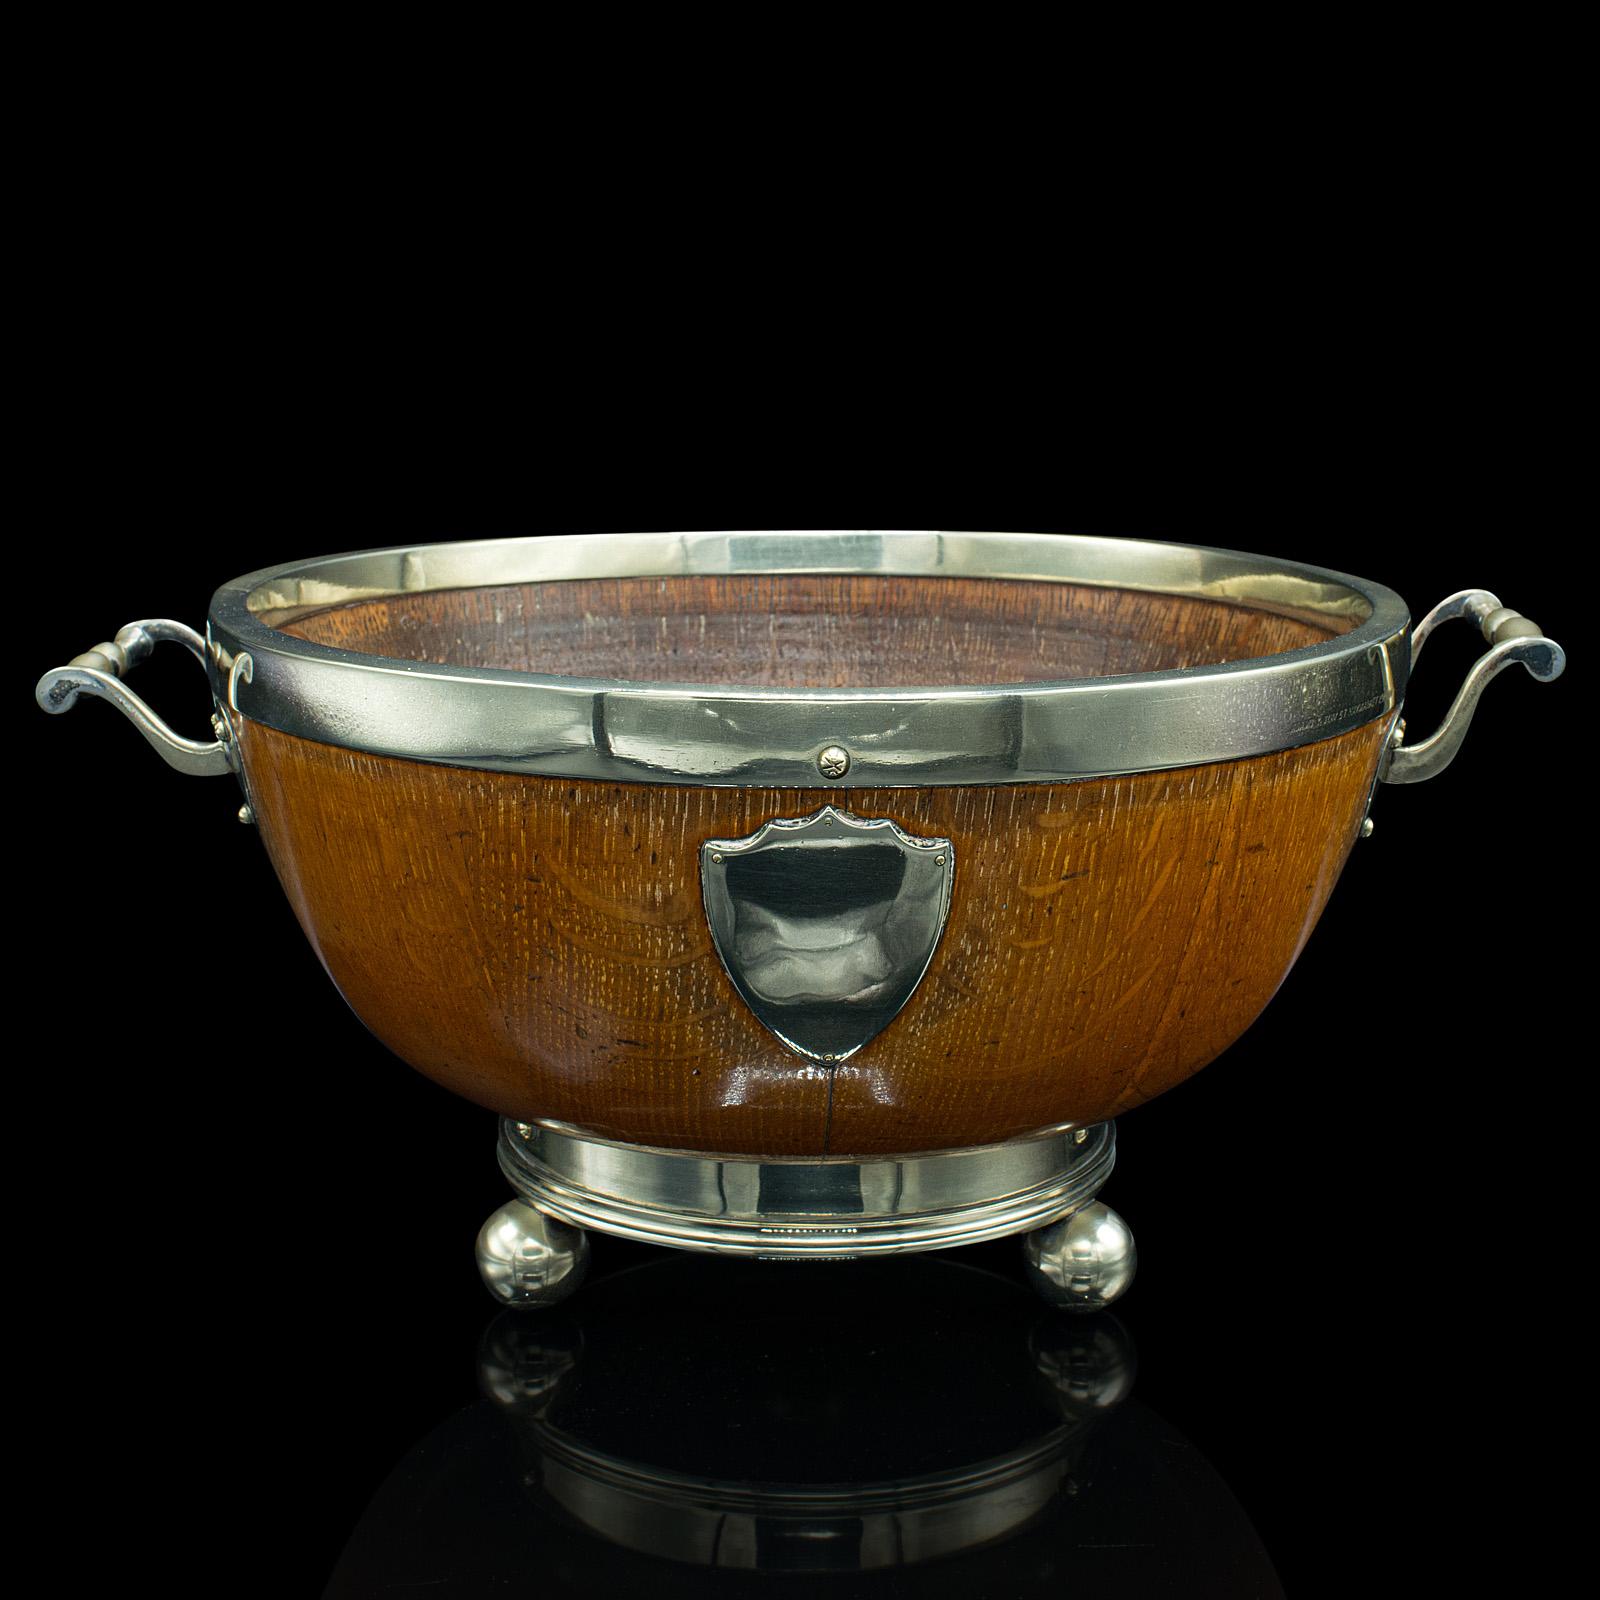 This is an antique fruit bowl. An English, oak and silver plate country house serving dish, dating to the Victorian period, circa 1870.

Strikingly attractive appearance with the contrast between the materials
Displays a desirable aged patina and